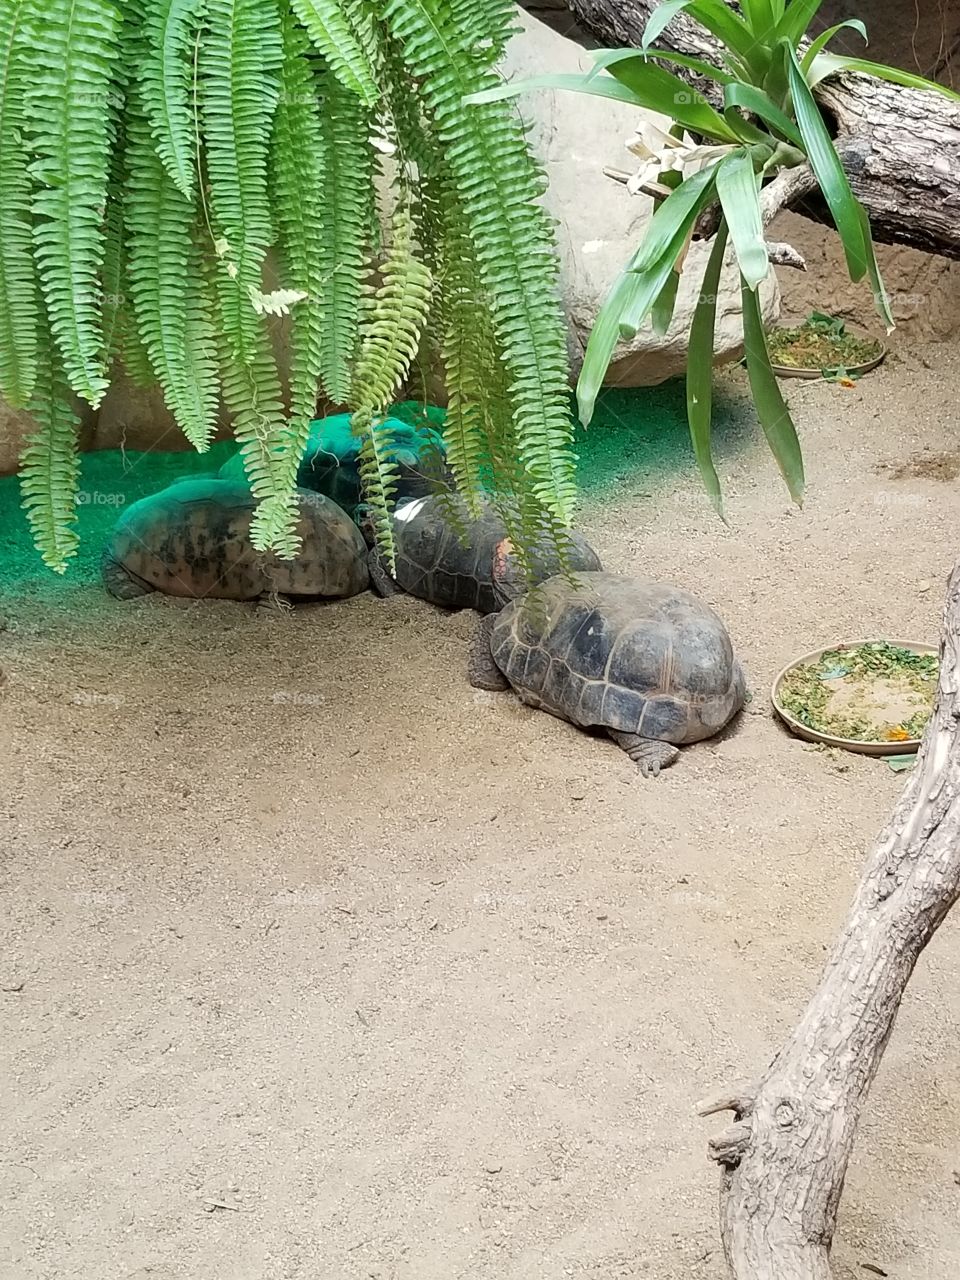 Turtles at Lincoln Park Zoo